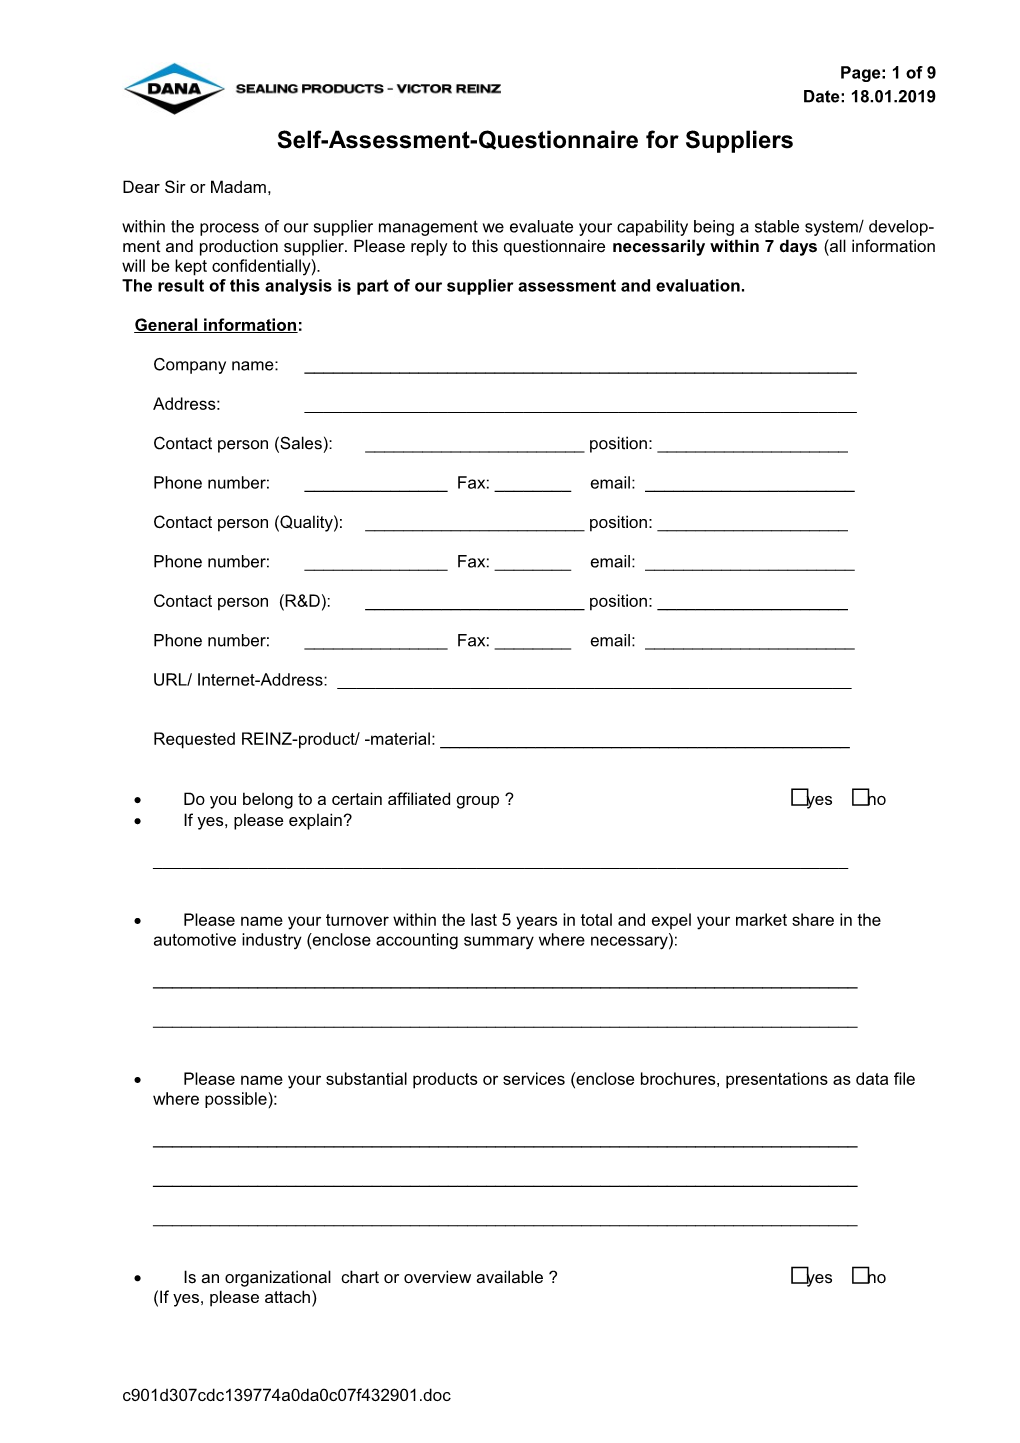 Self-Assessment-Questionnaire for Suppliers